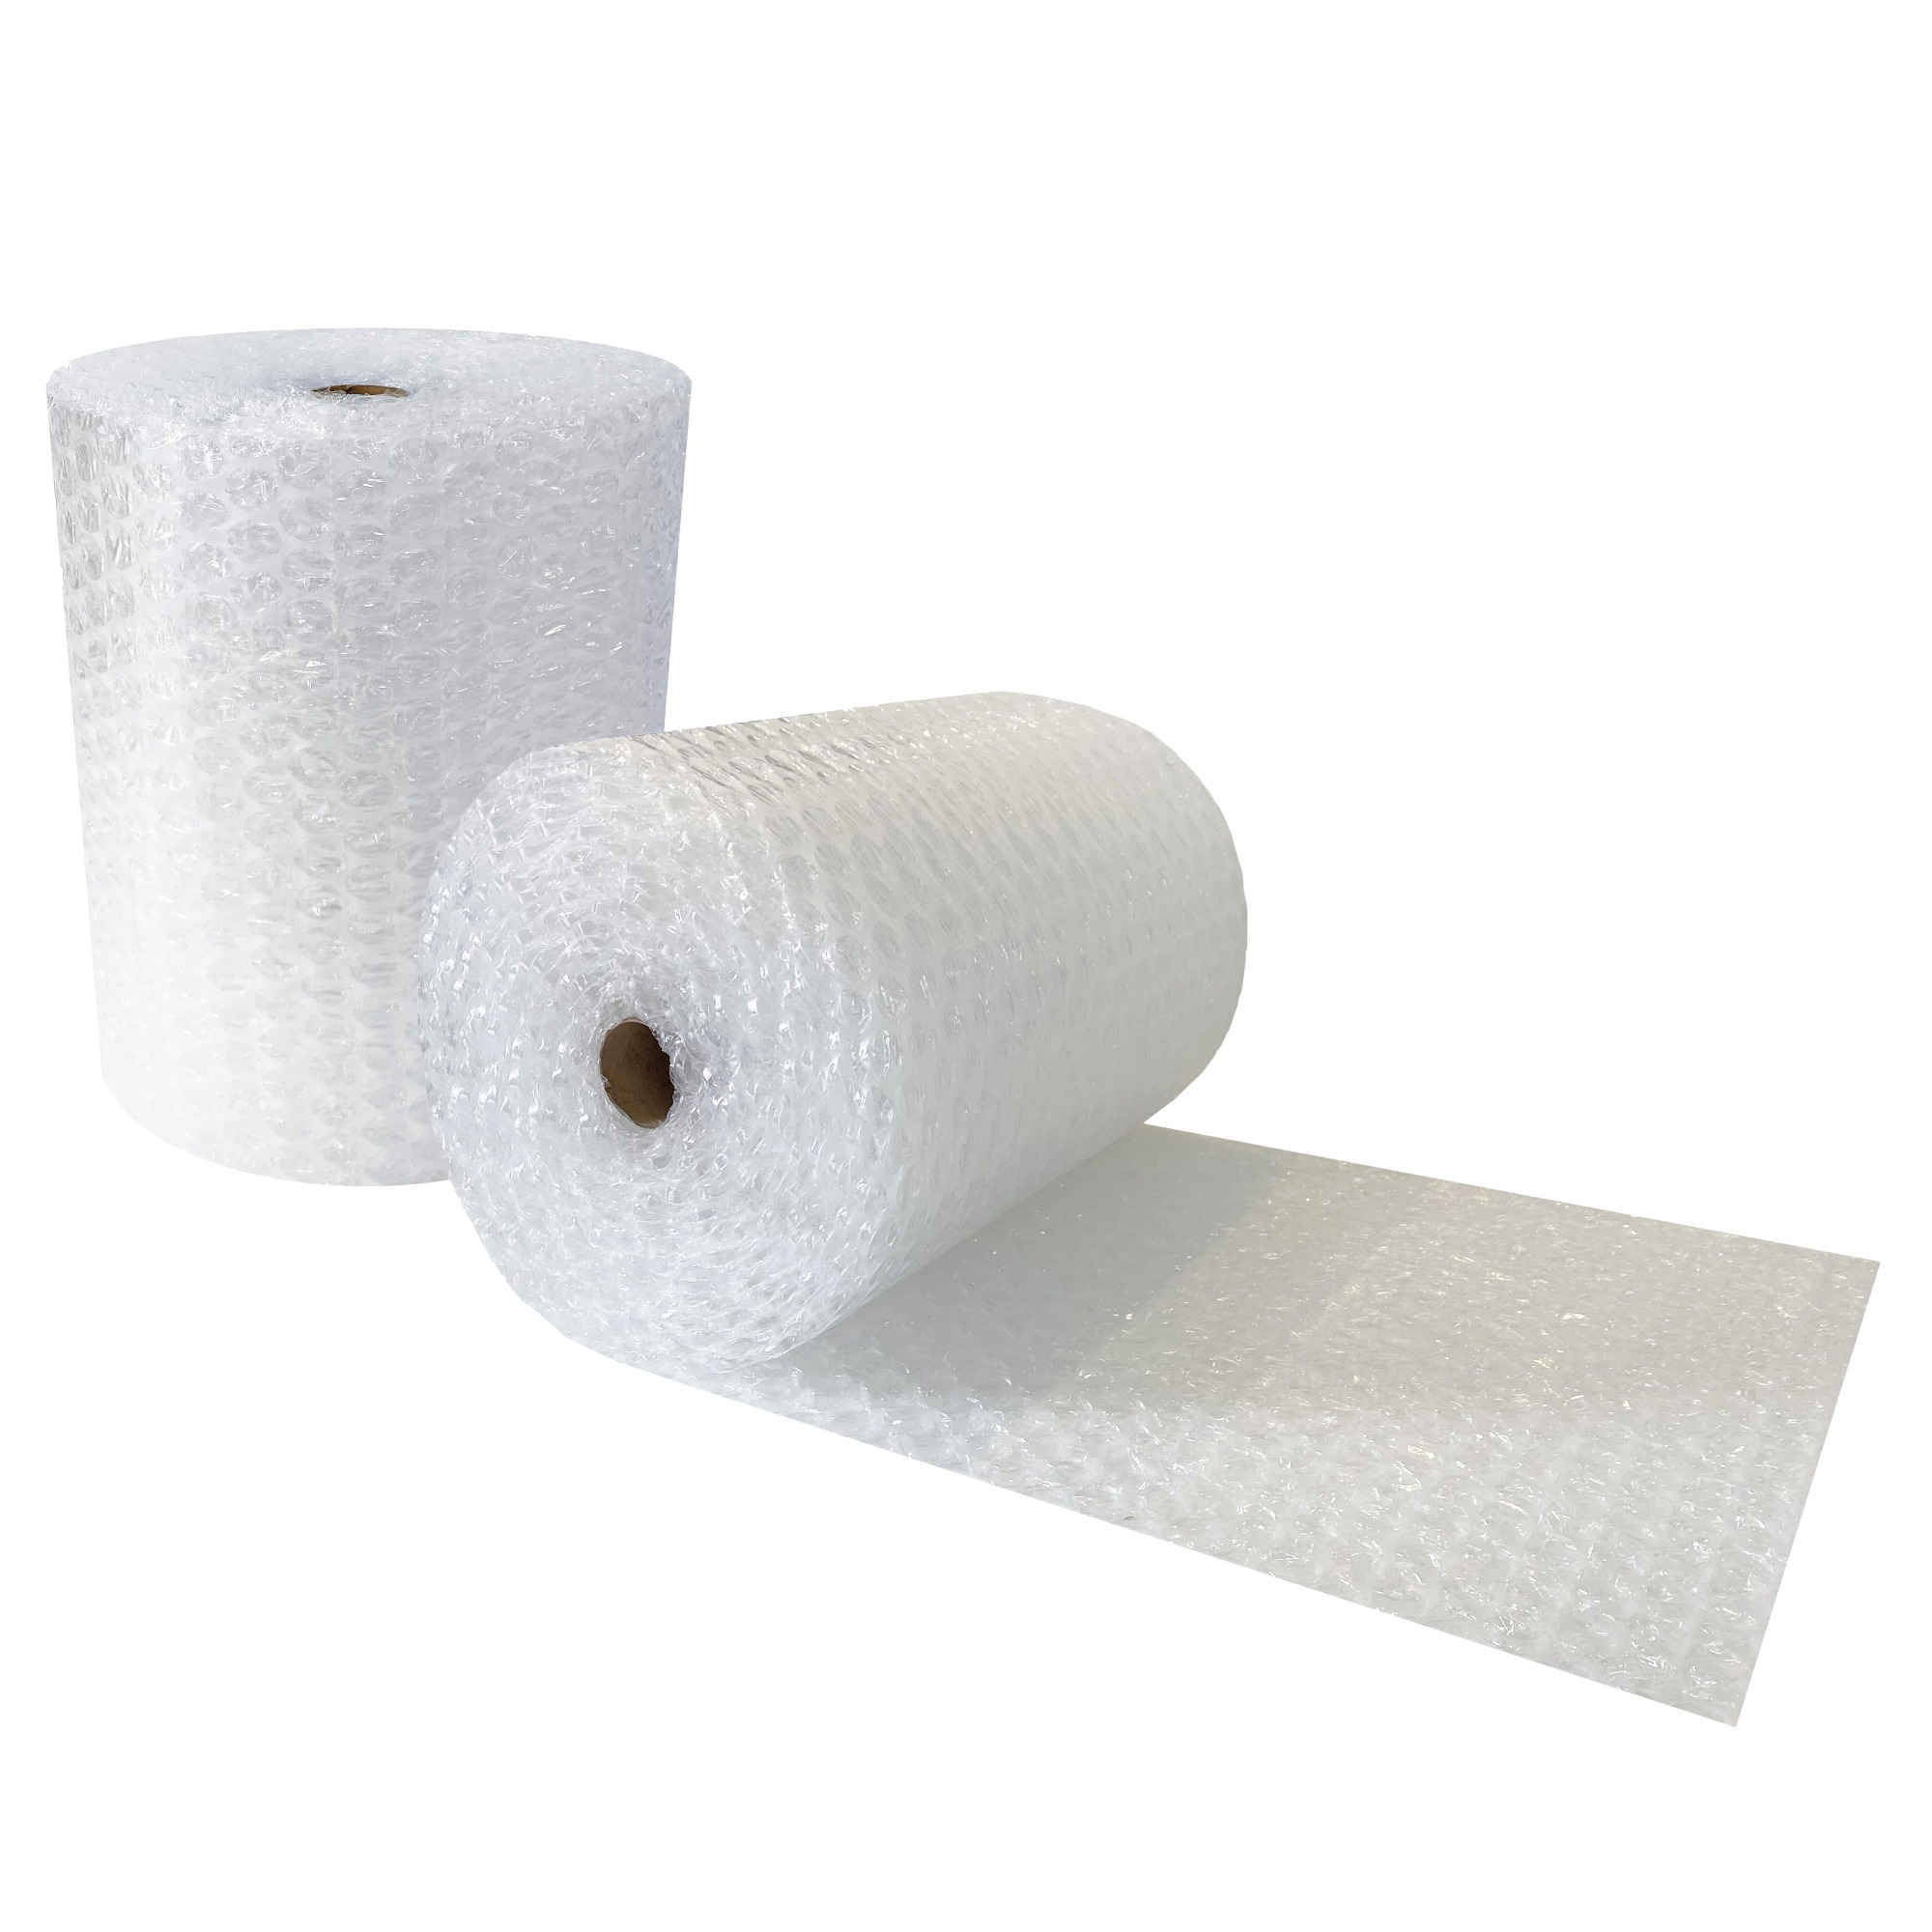 Diamond Packaging 1 x Large Bubble Wrap Roll Strong Enough Ideal for House Moving Size Wide 300mm x 20m Length